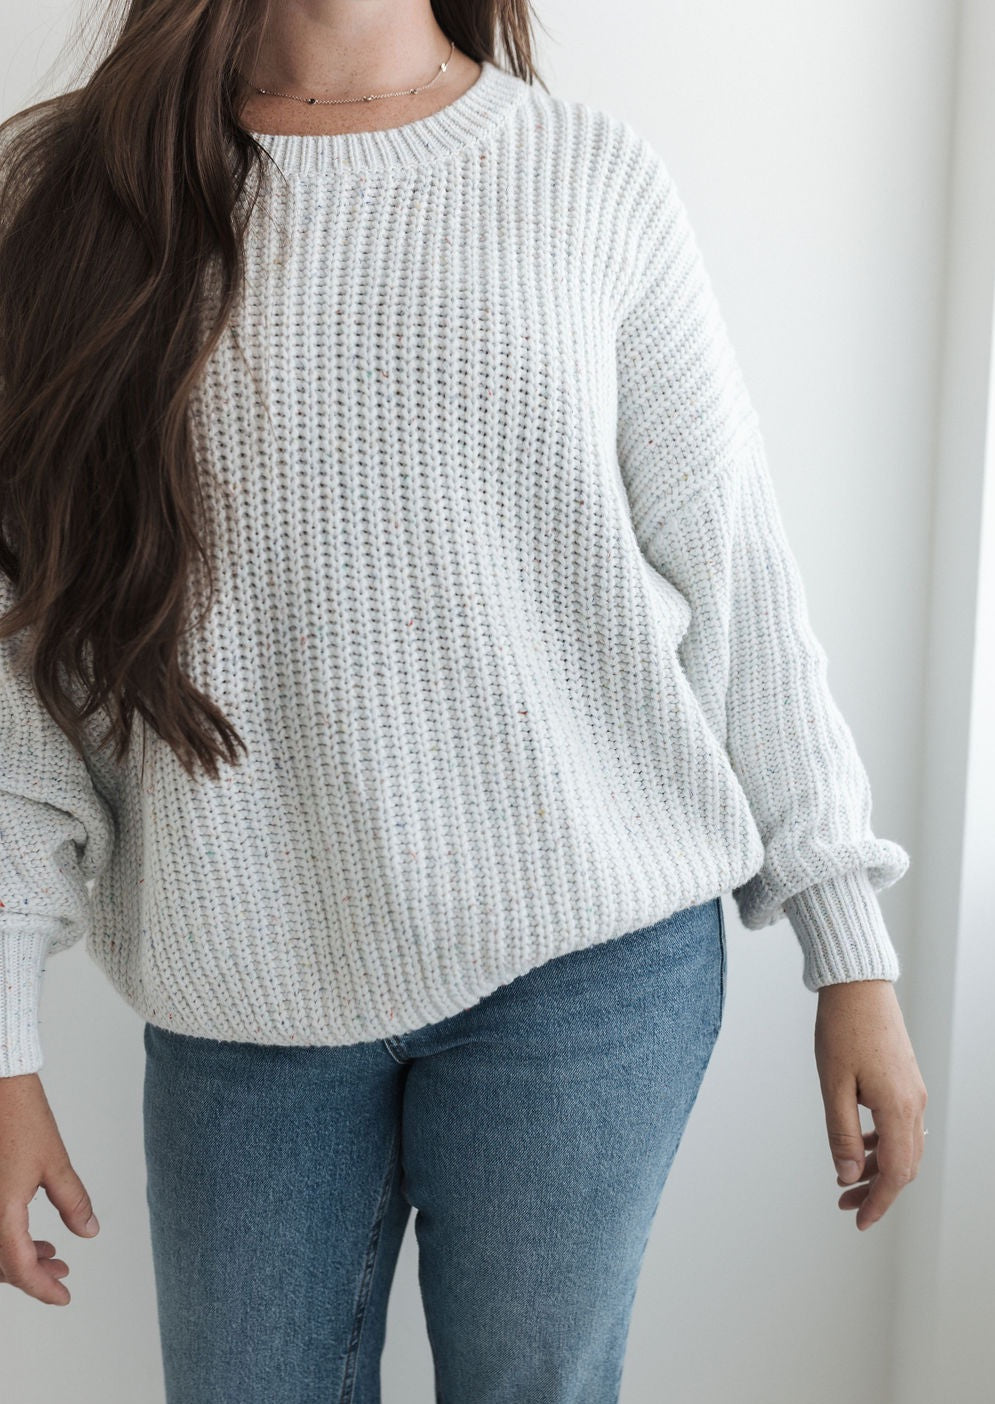 Adult Chunky Knit Sweater | Frosted Sprinkles - Mila & Co.